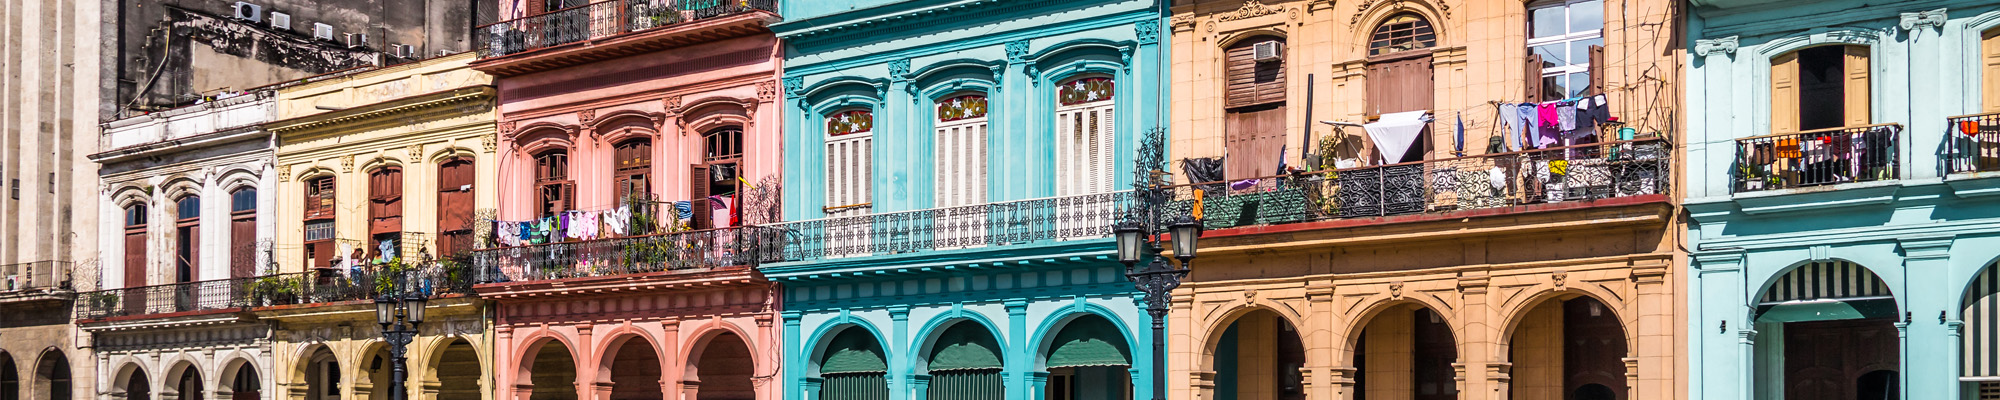 colorful houses in Cuba